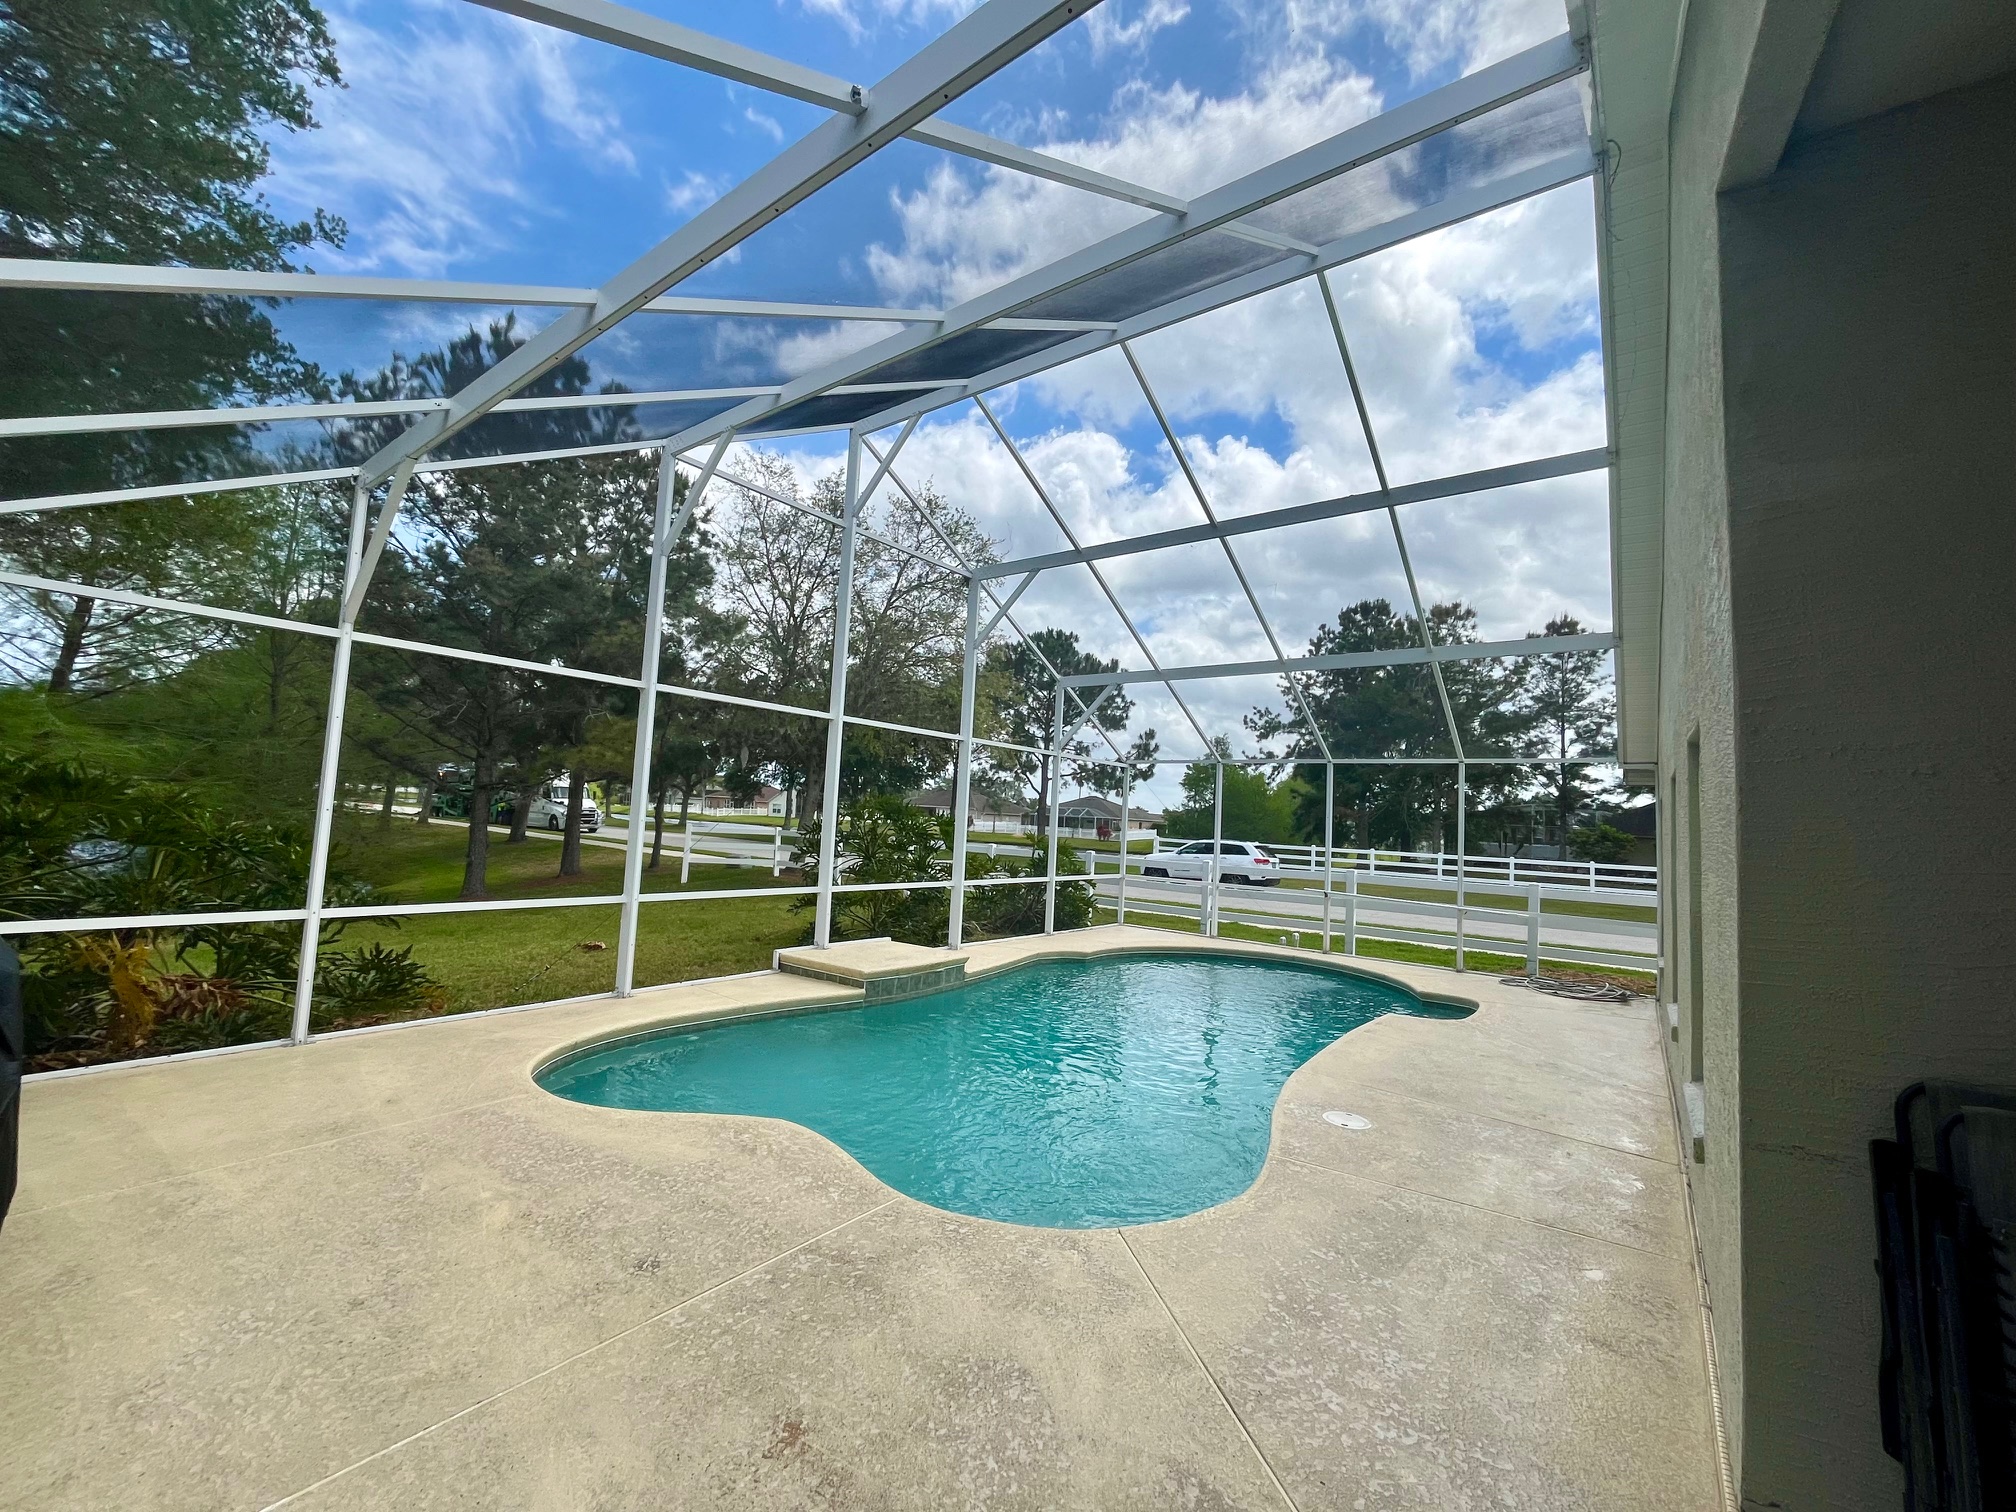 Transformational Pool Enclosure Cleaning Project In Port Orange, Florida